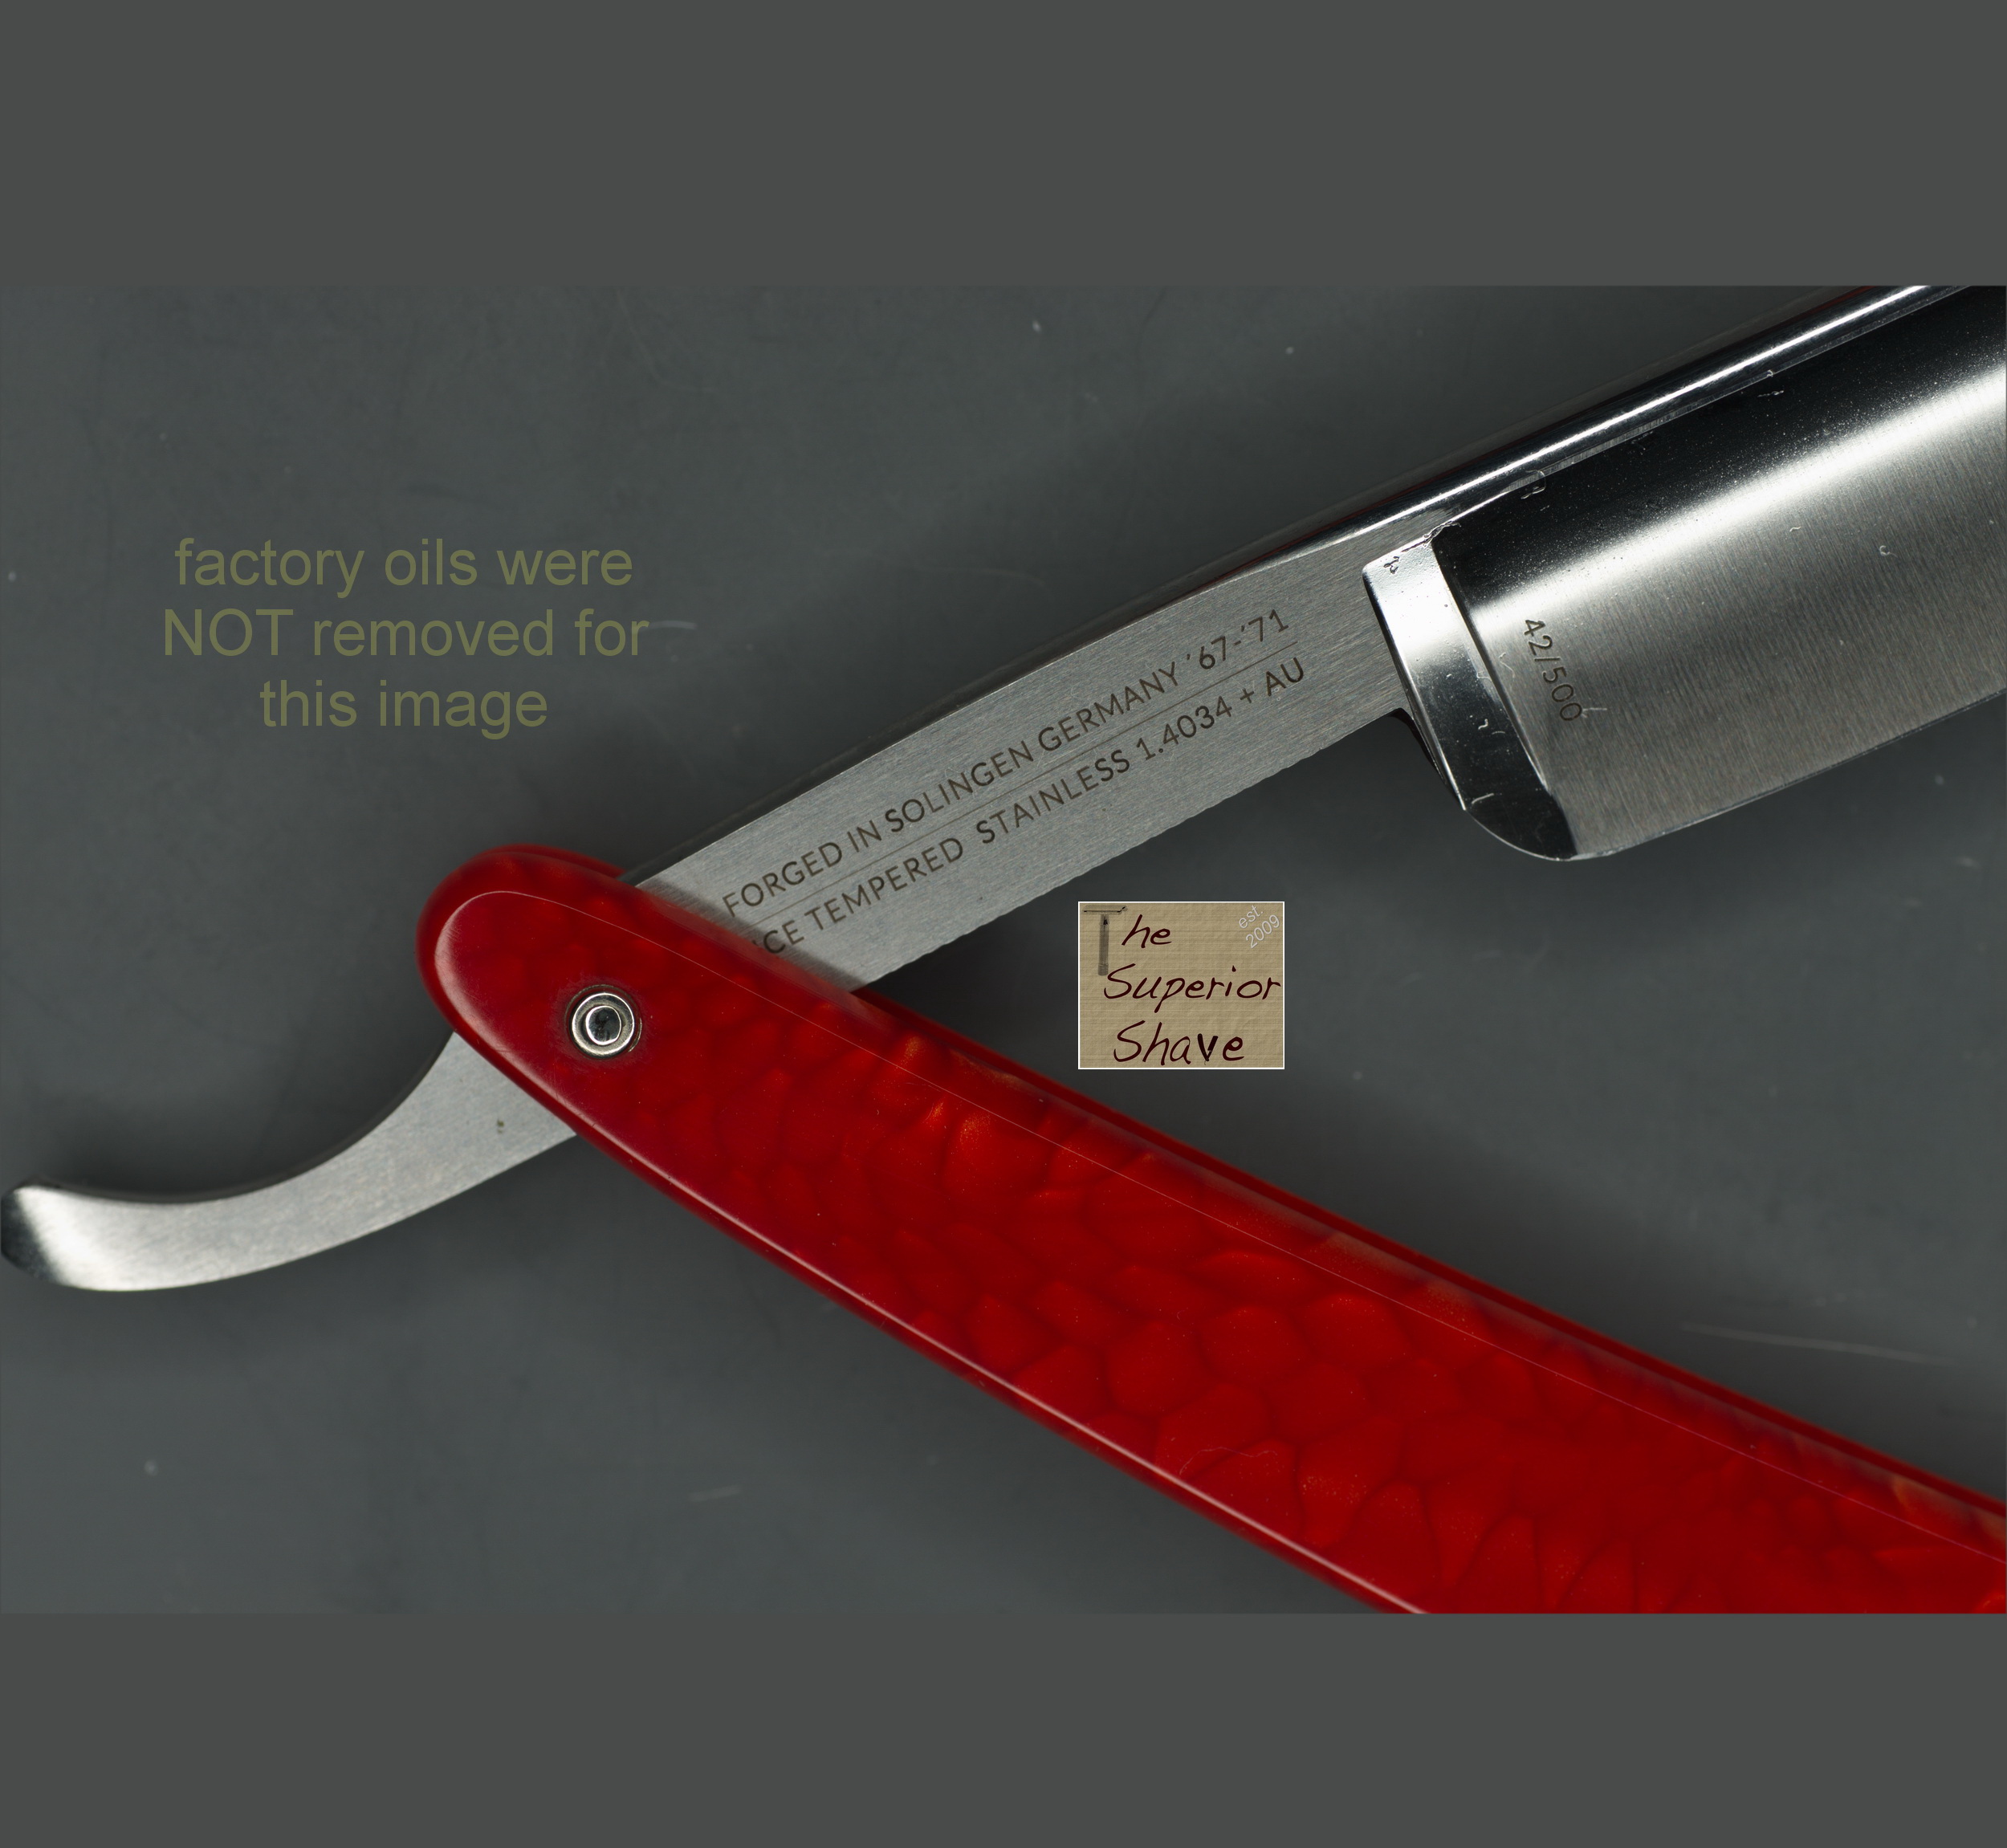 Dovo Facharbeit German Straight Razor | Full Look 1967-1971 6/8 Red Reptile Square | Steel | | Point | Stainless Germany in Handle, | Hollow Size 136813315 HISTORIC Ground Acrylic | Made